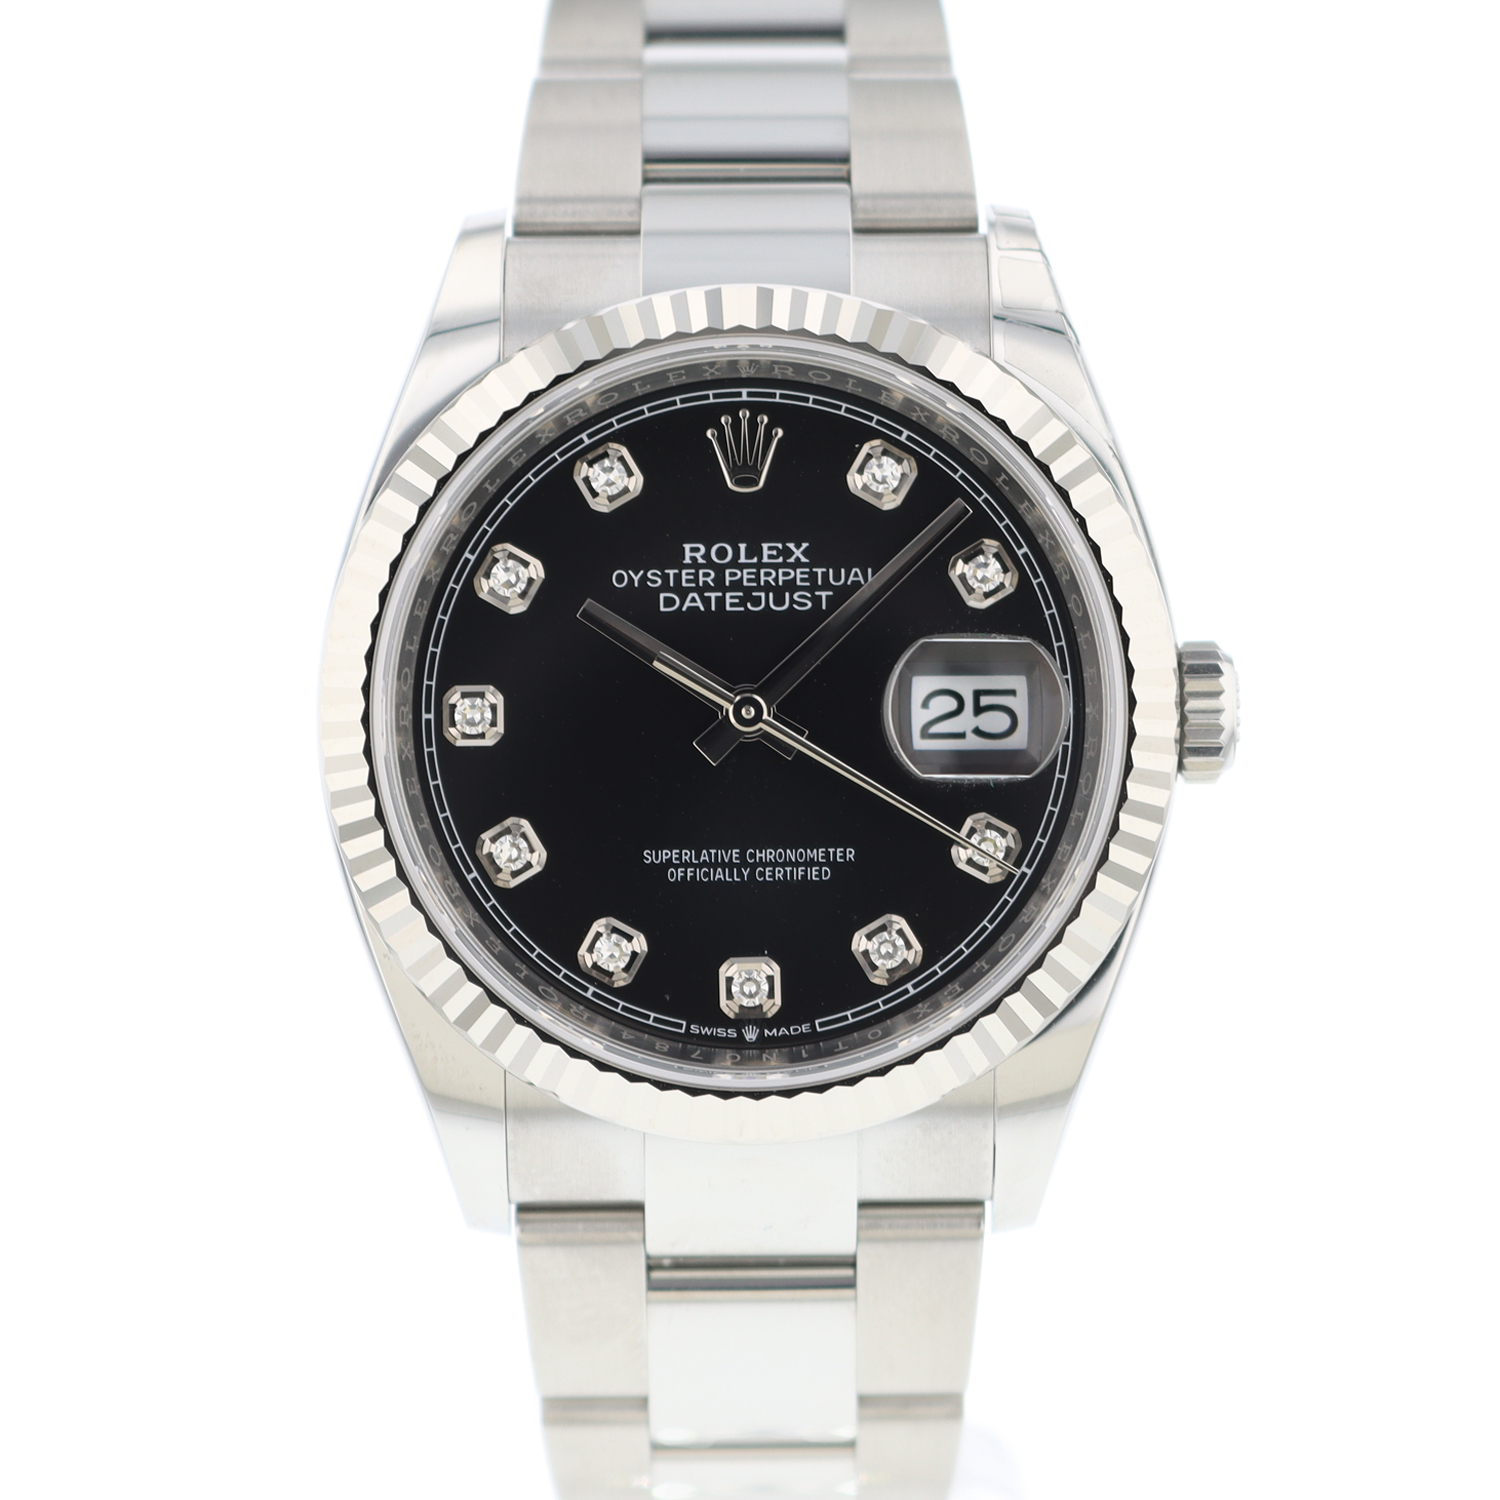 Datejust 36 Fluted Black Diamond Dial NEW! - Rolex - Sold watches ...